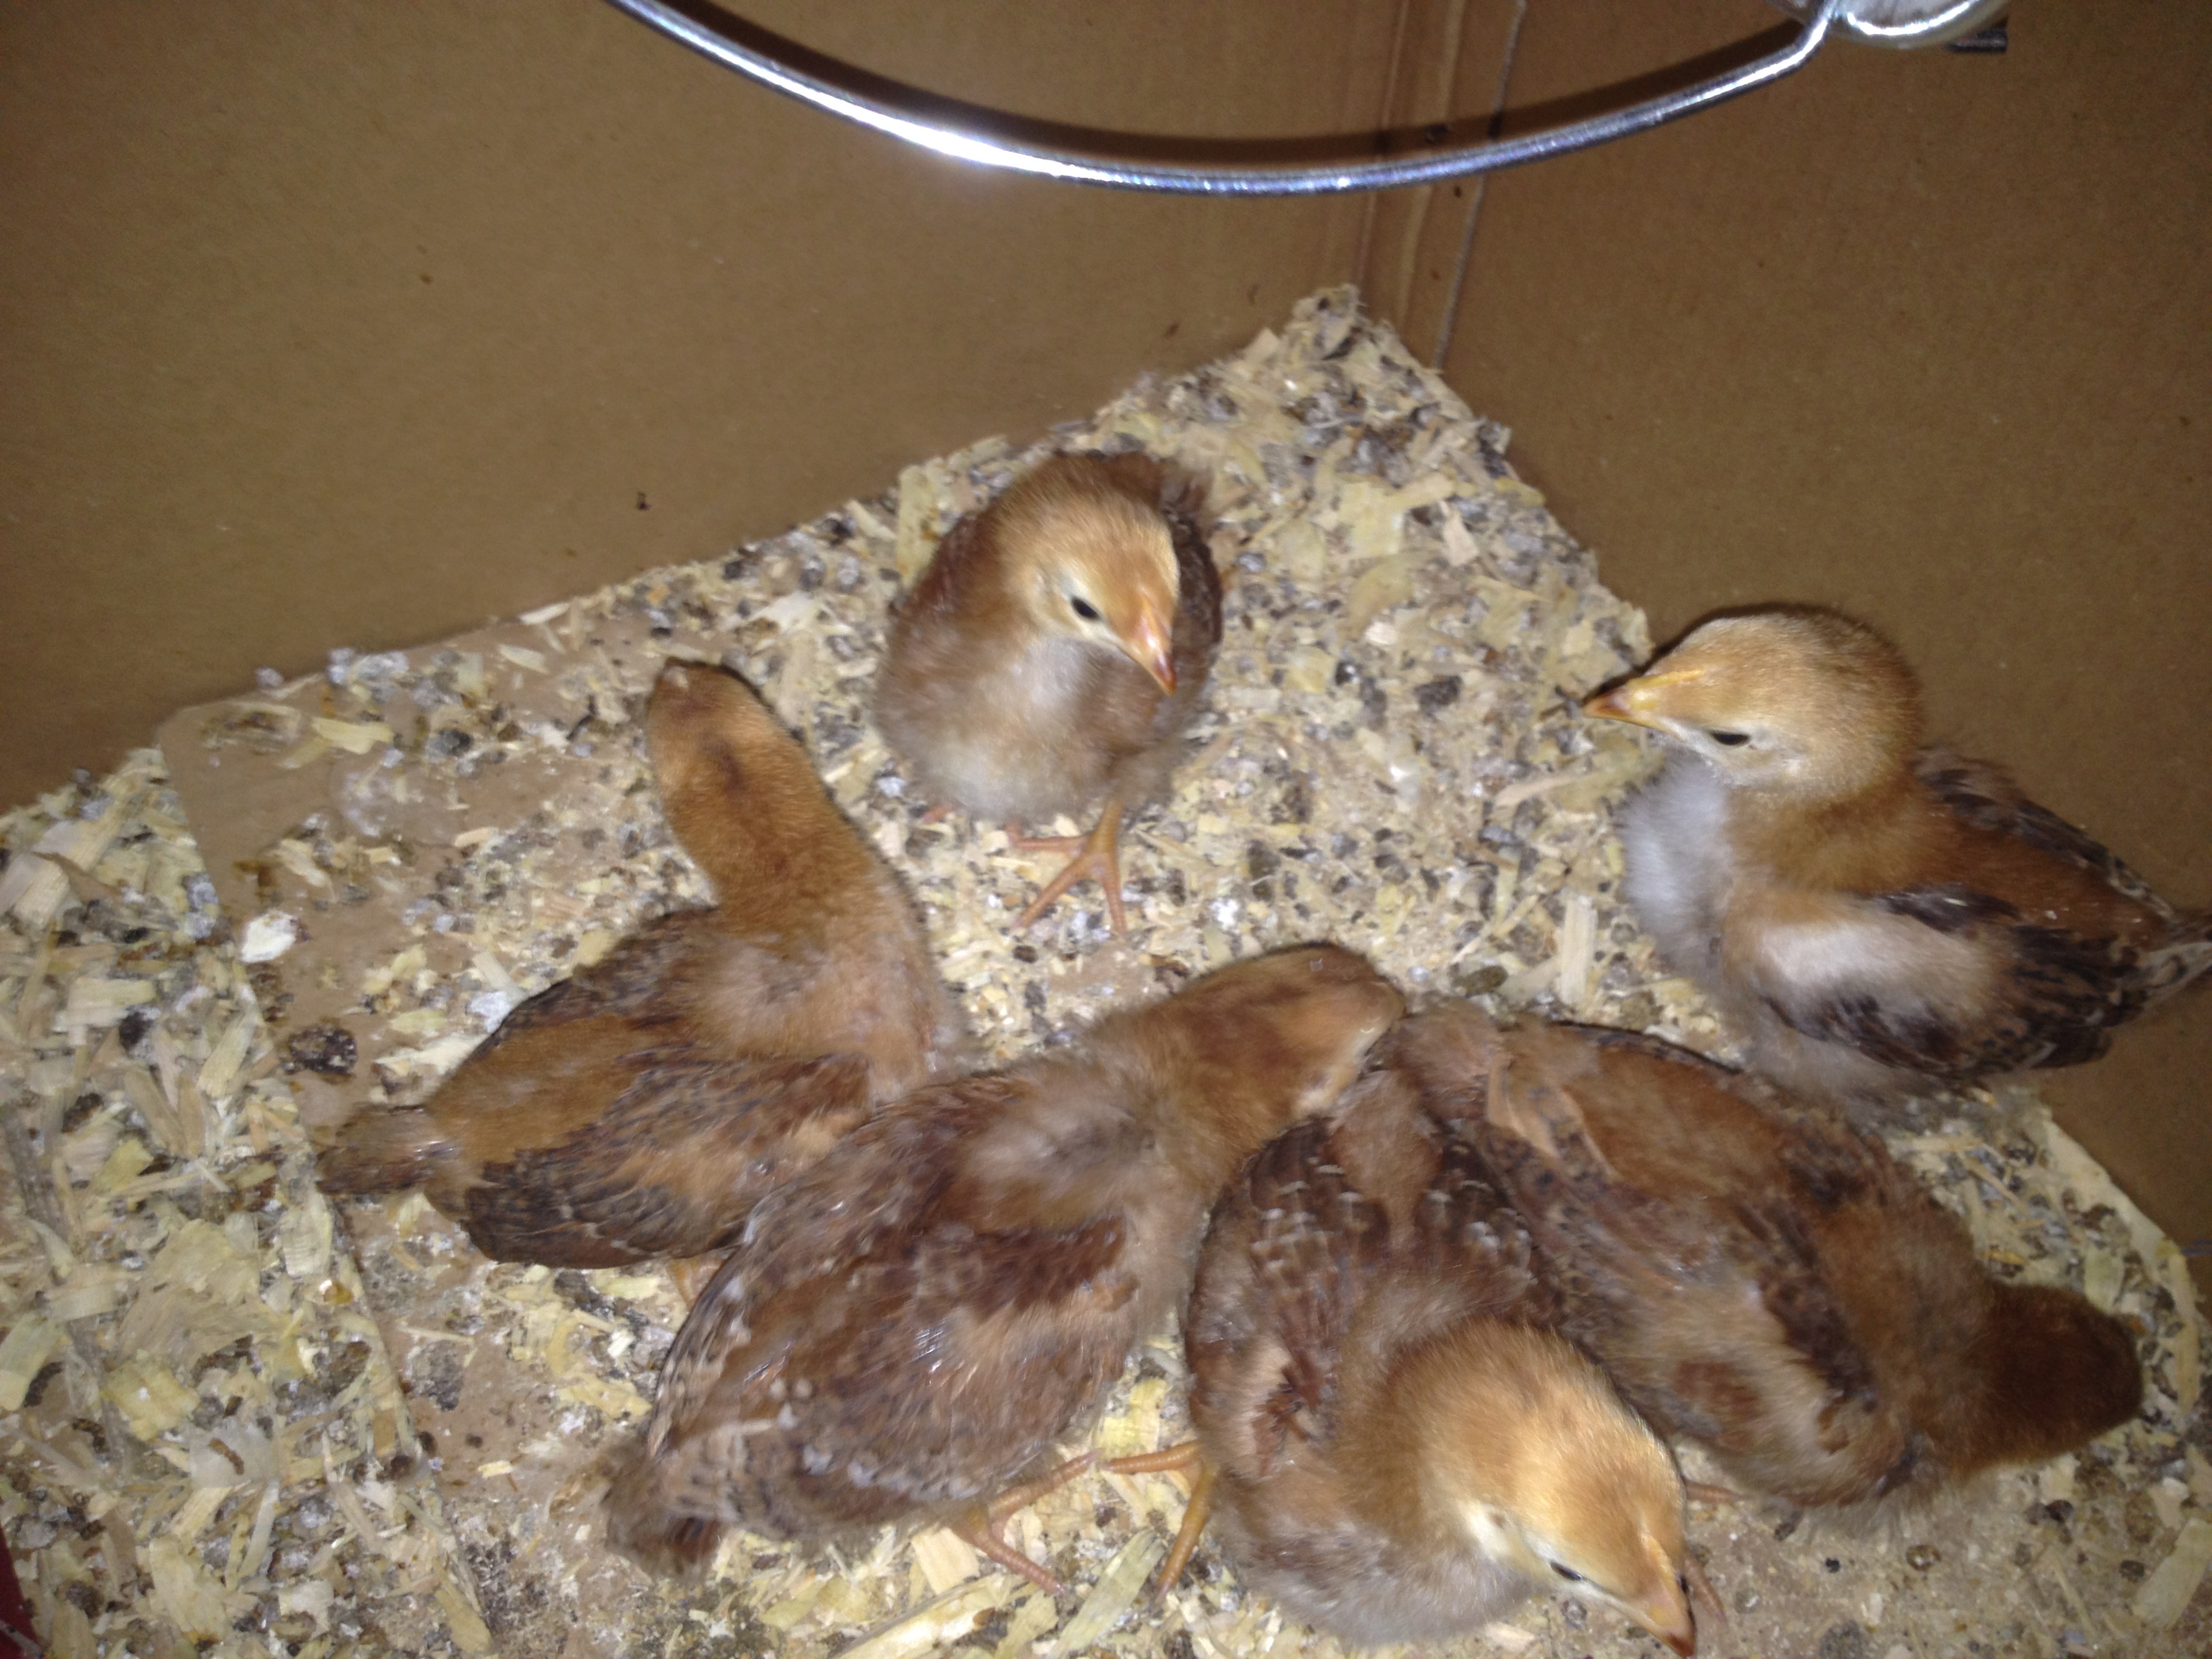 Anyone have an idea how old these Rhode Island Red chicks are? I bought them 12 days ago from a local distributor who told me they were just a couple of days old. Given how quickly they have gone from peach fuzz to feathers, and how large they are, I'm thinking they are older than the seller said.  It hardly matters, except I like to understand their age versus their development.